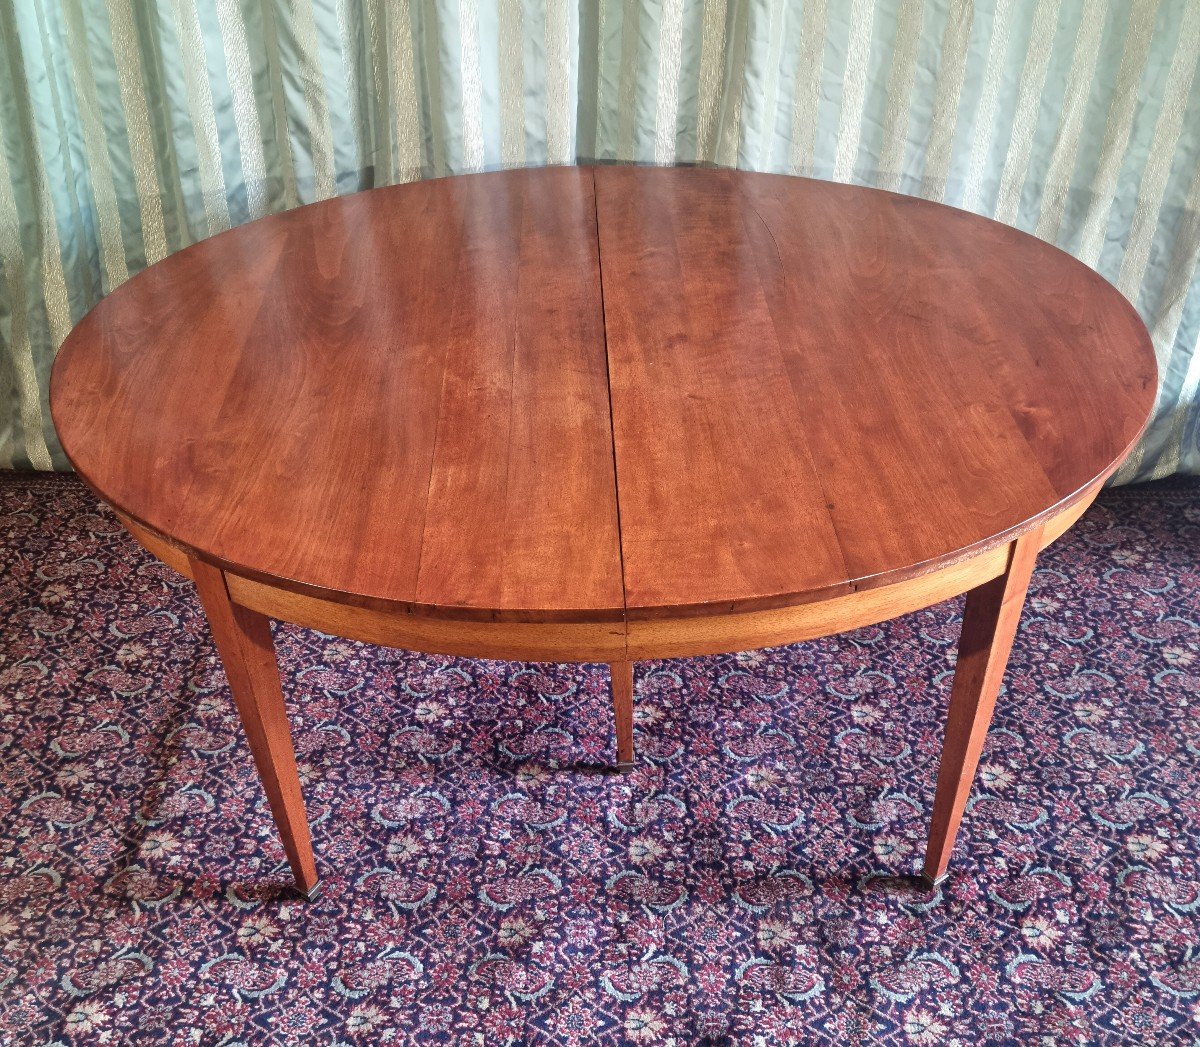 Six Legs Oval Table With Extensions In Blond Mahogany, Louis XVI Period, 18th 